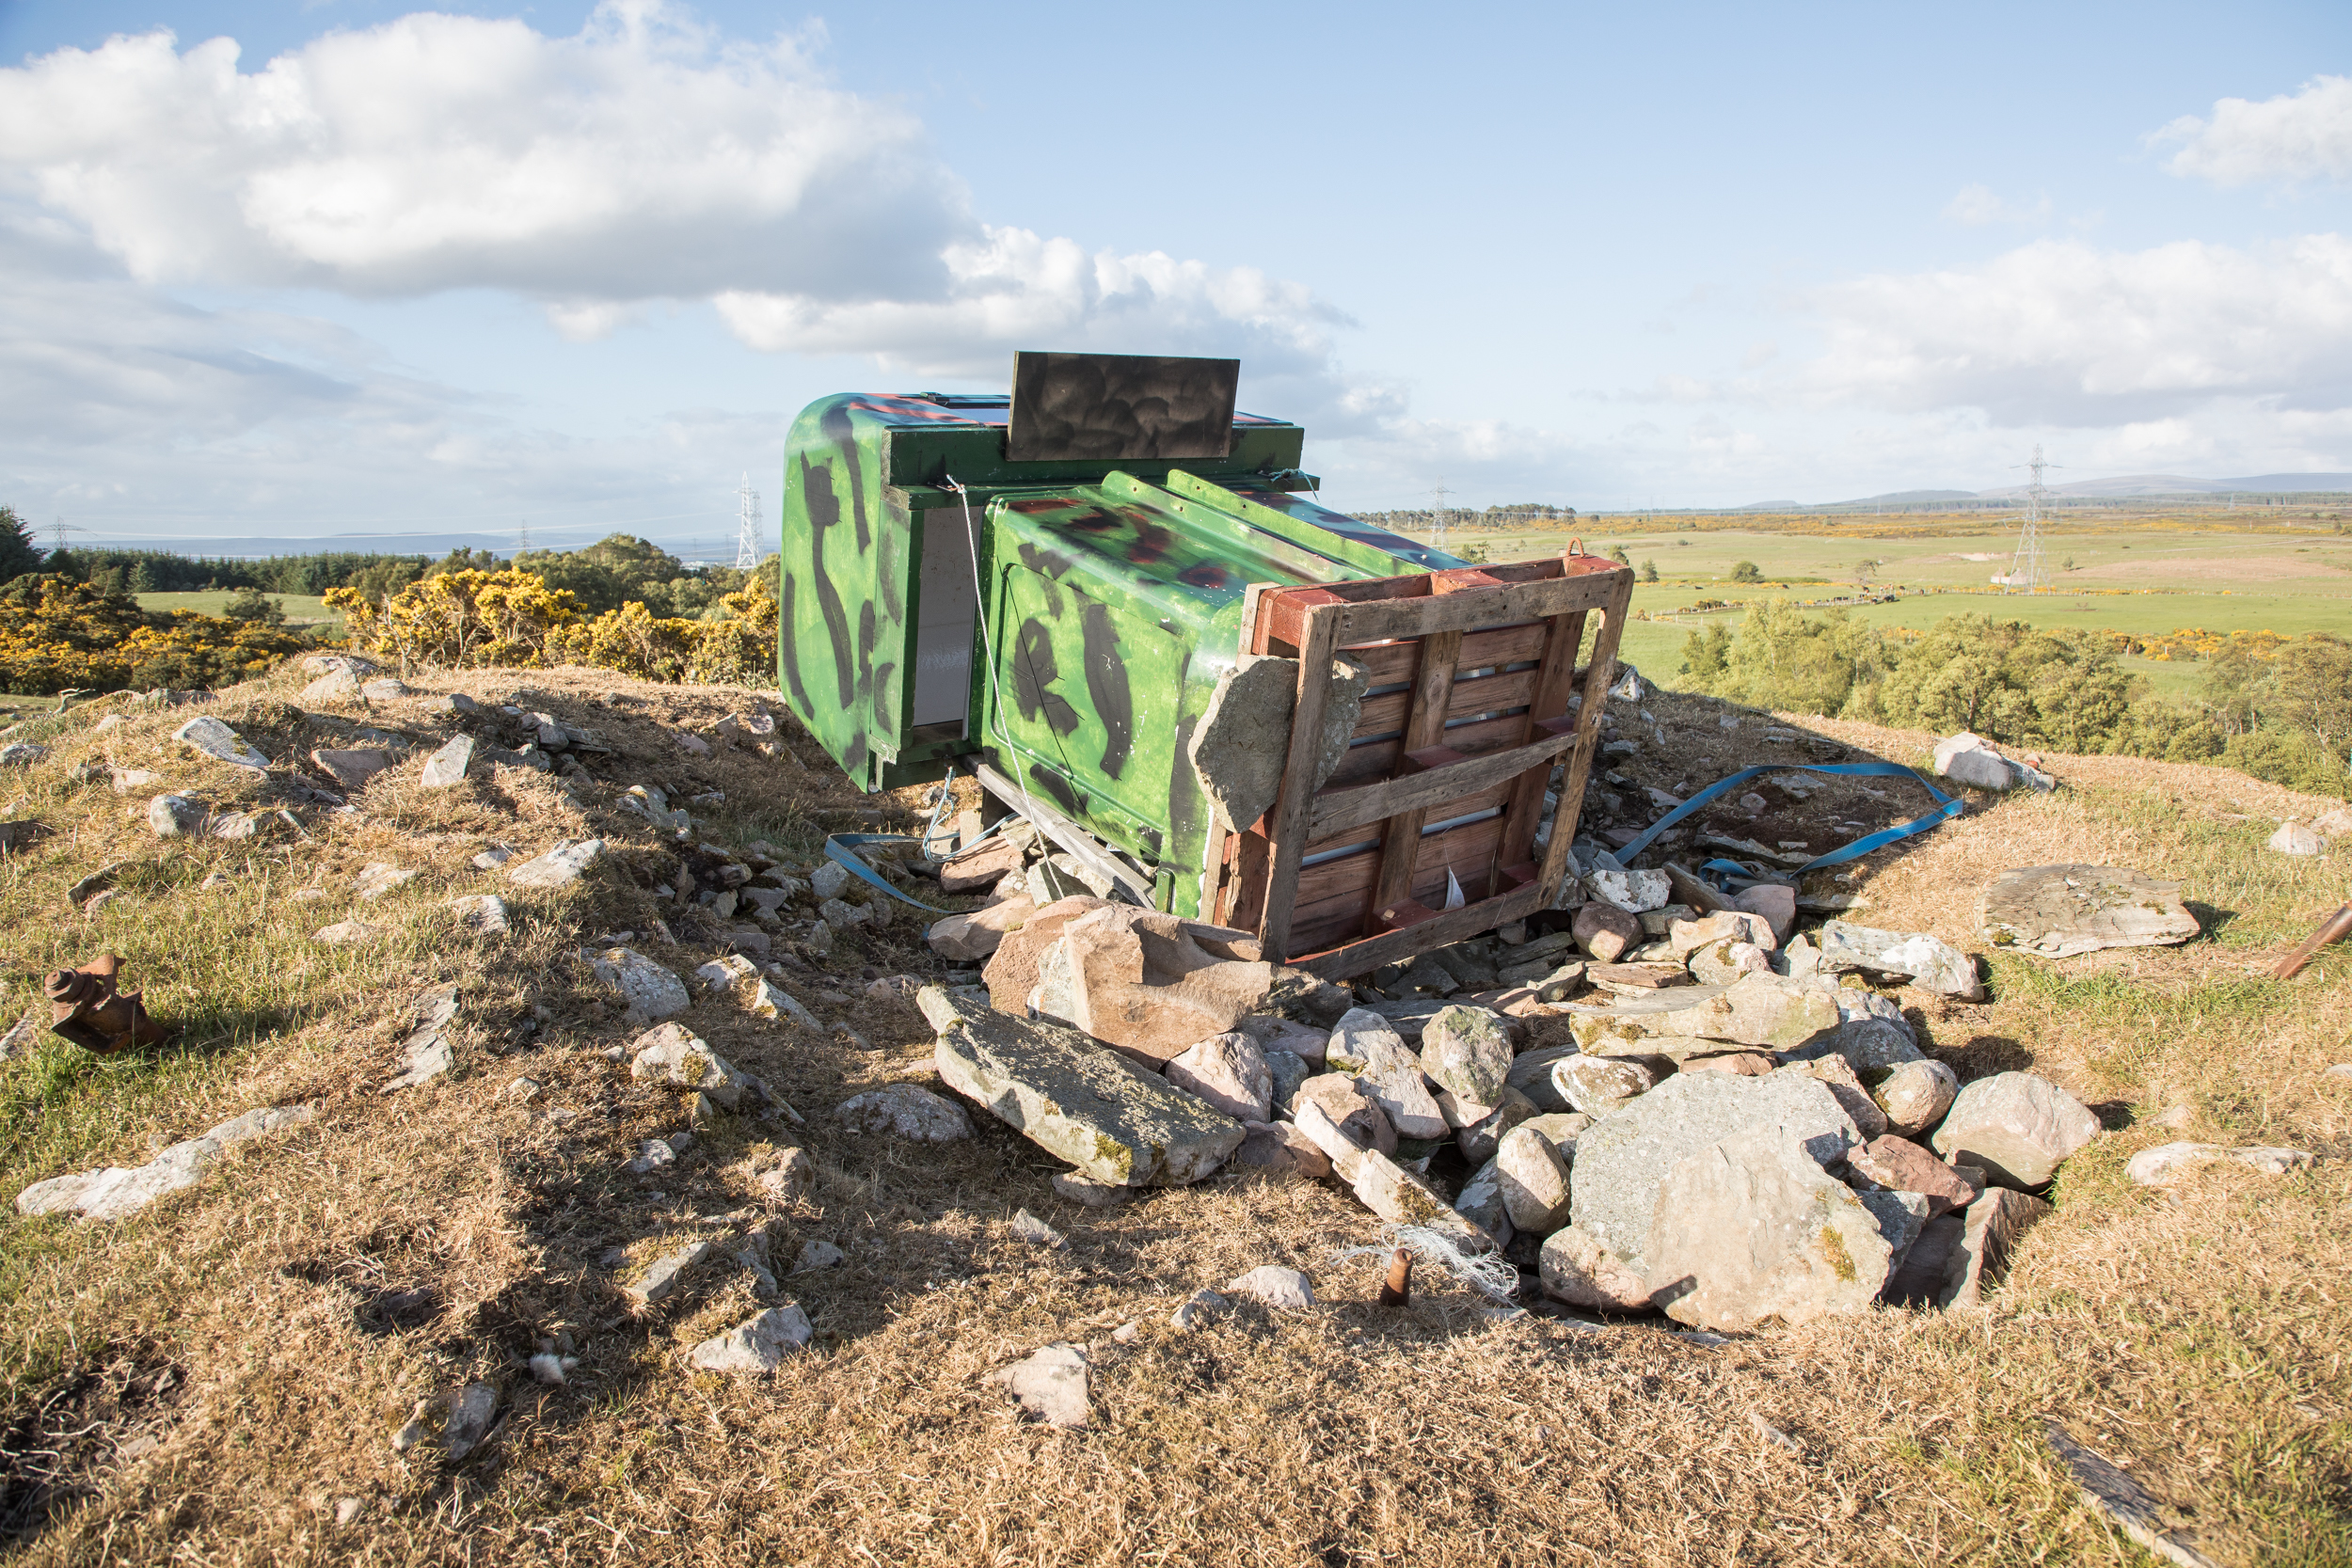 What appears to be a bird watching hide was installed on top of an ancient chambered cairn